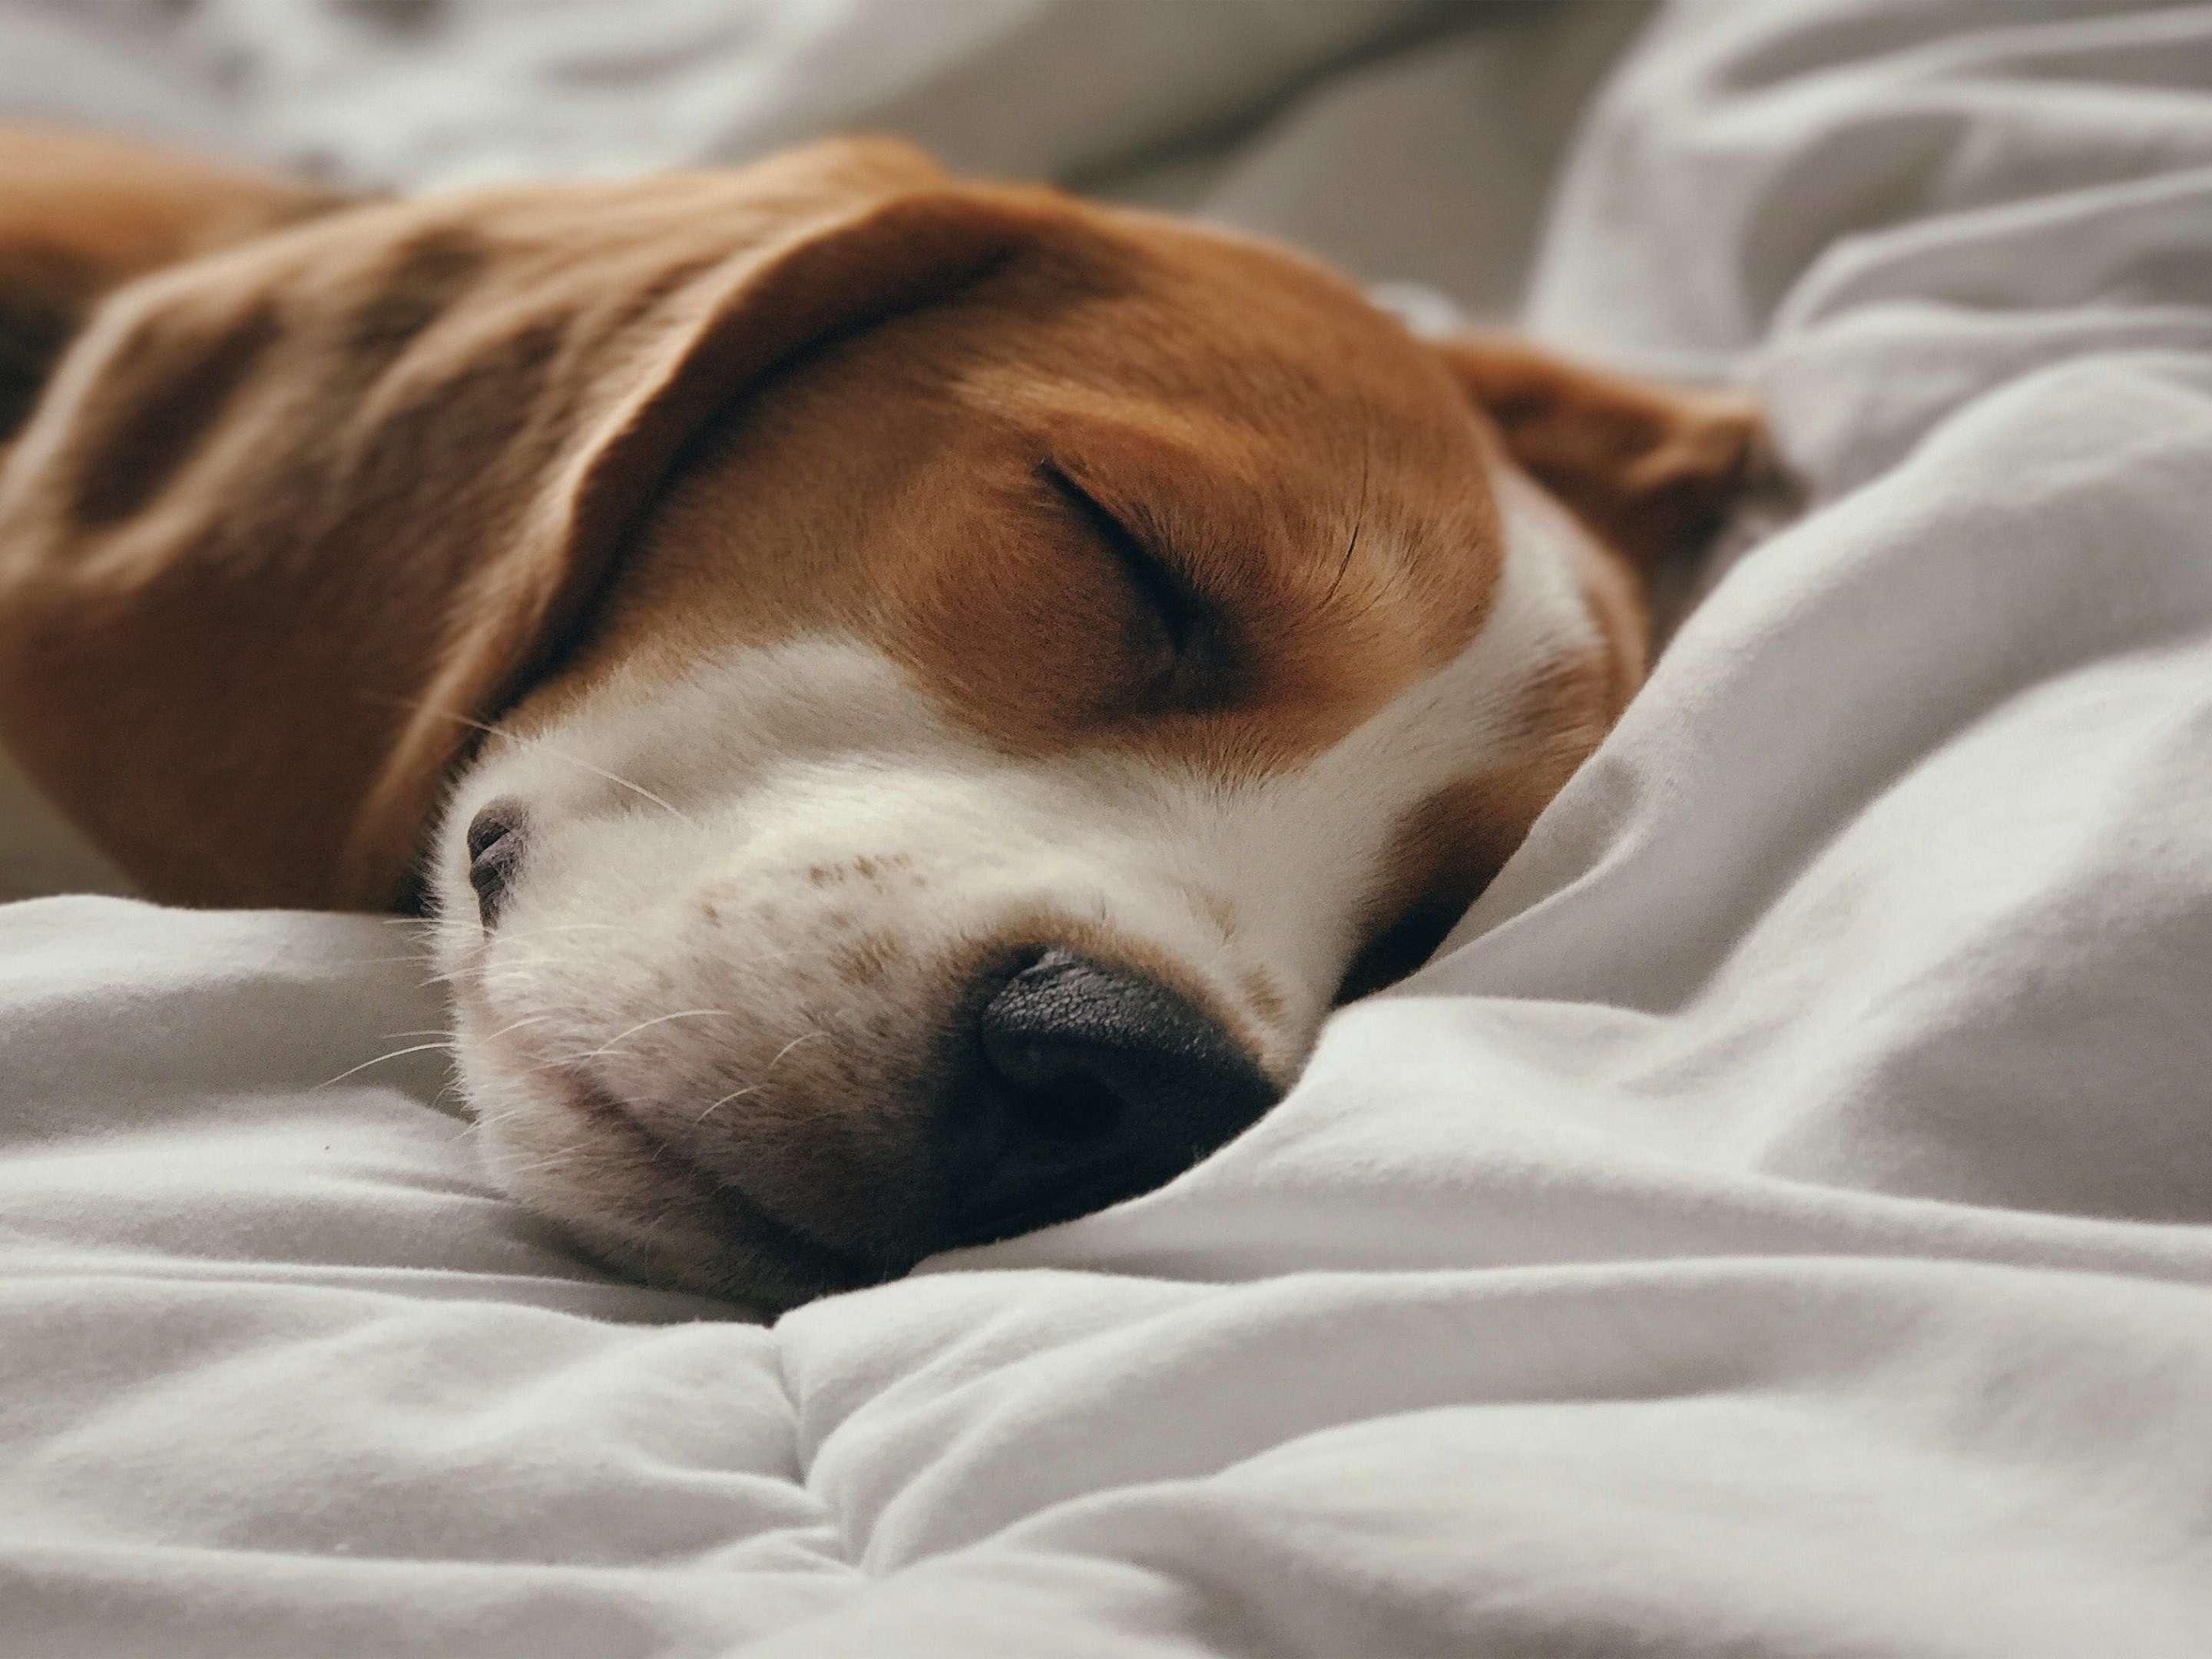 Bring along your furry friends (under 40 pounds) when visiting our pet-friendly hotel Baton Rouge, LA for a pet fee of $40 for the first night and $5 for each additional night. Service animals are allowed. A walking area for pets is available.